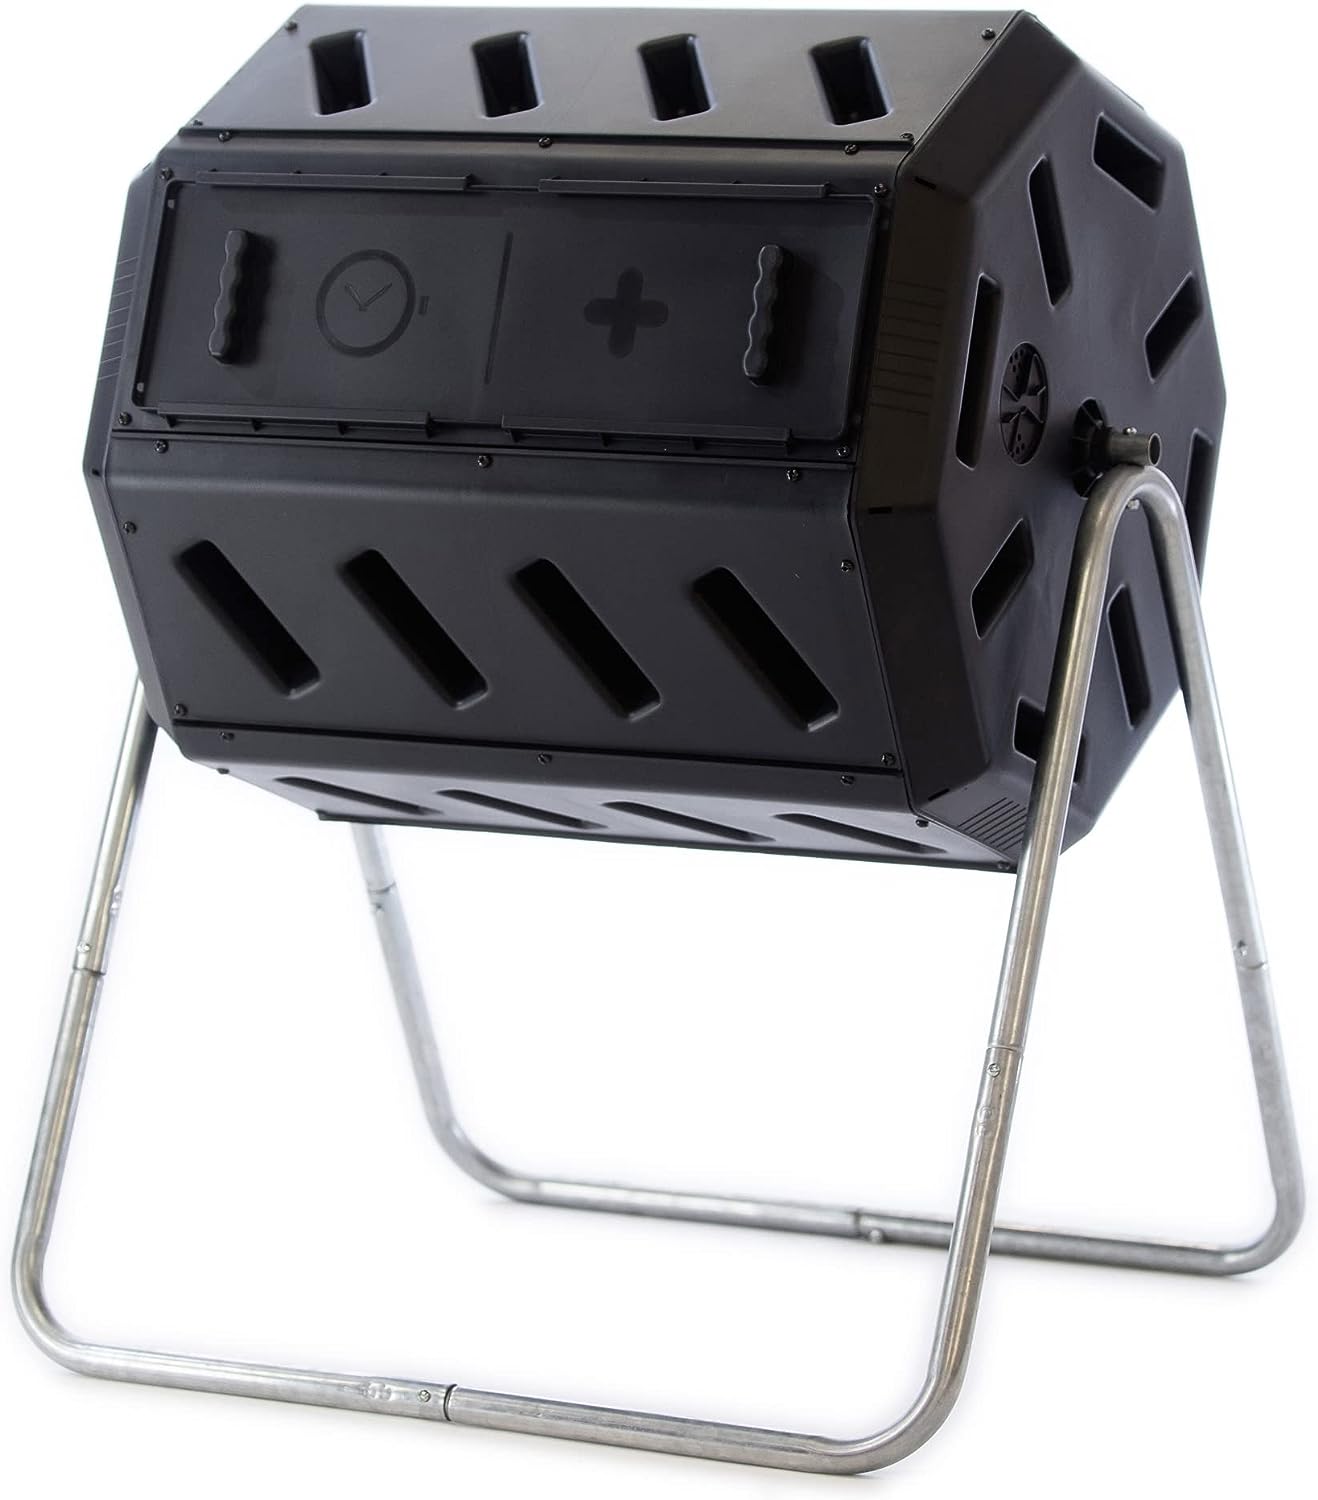 FCMP Outdoor IM4000 Dual Chamber Tumbling Composter [...]